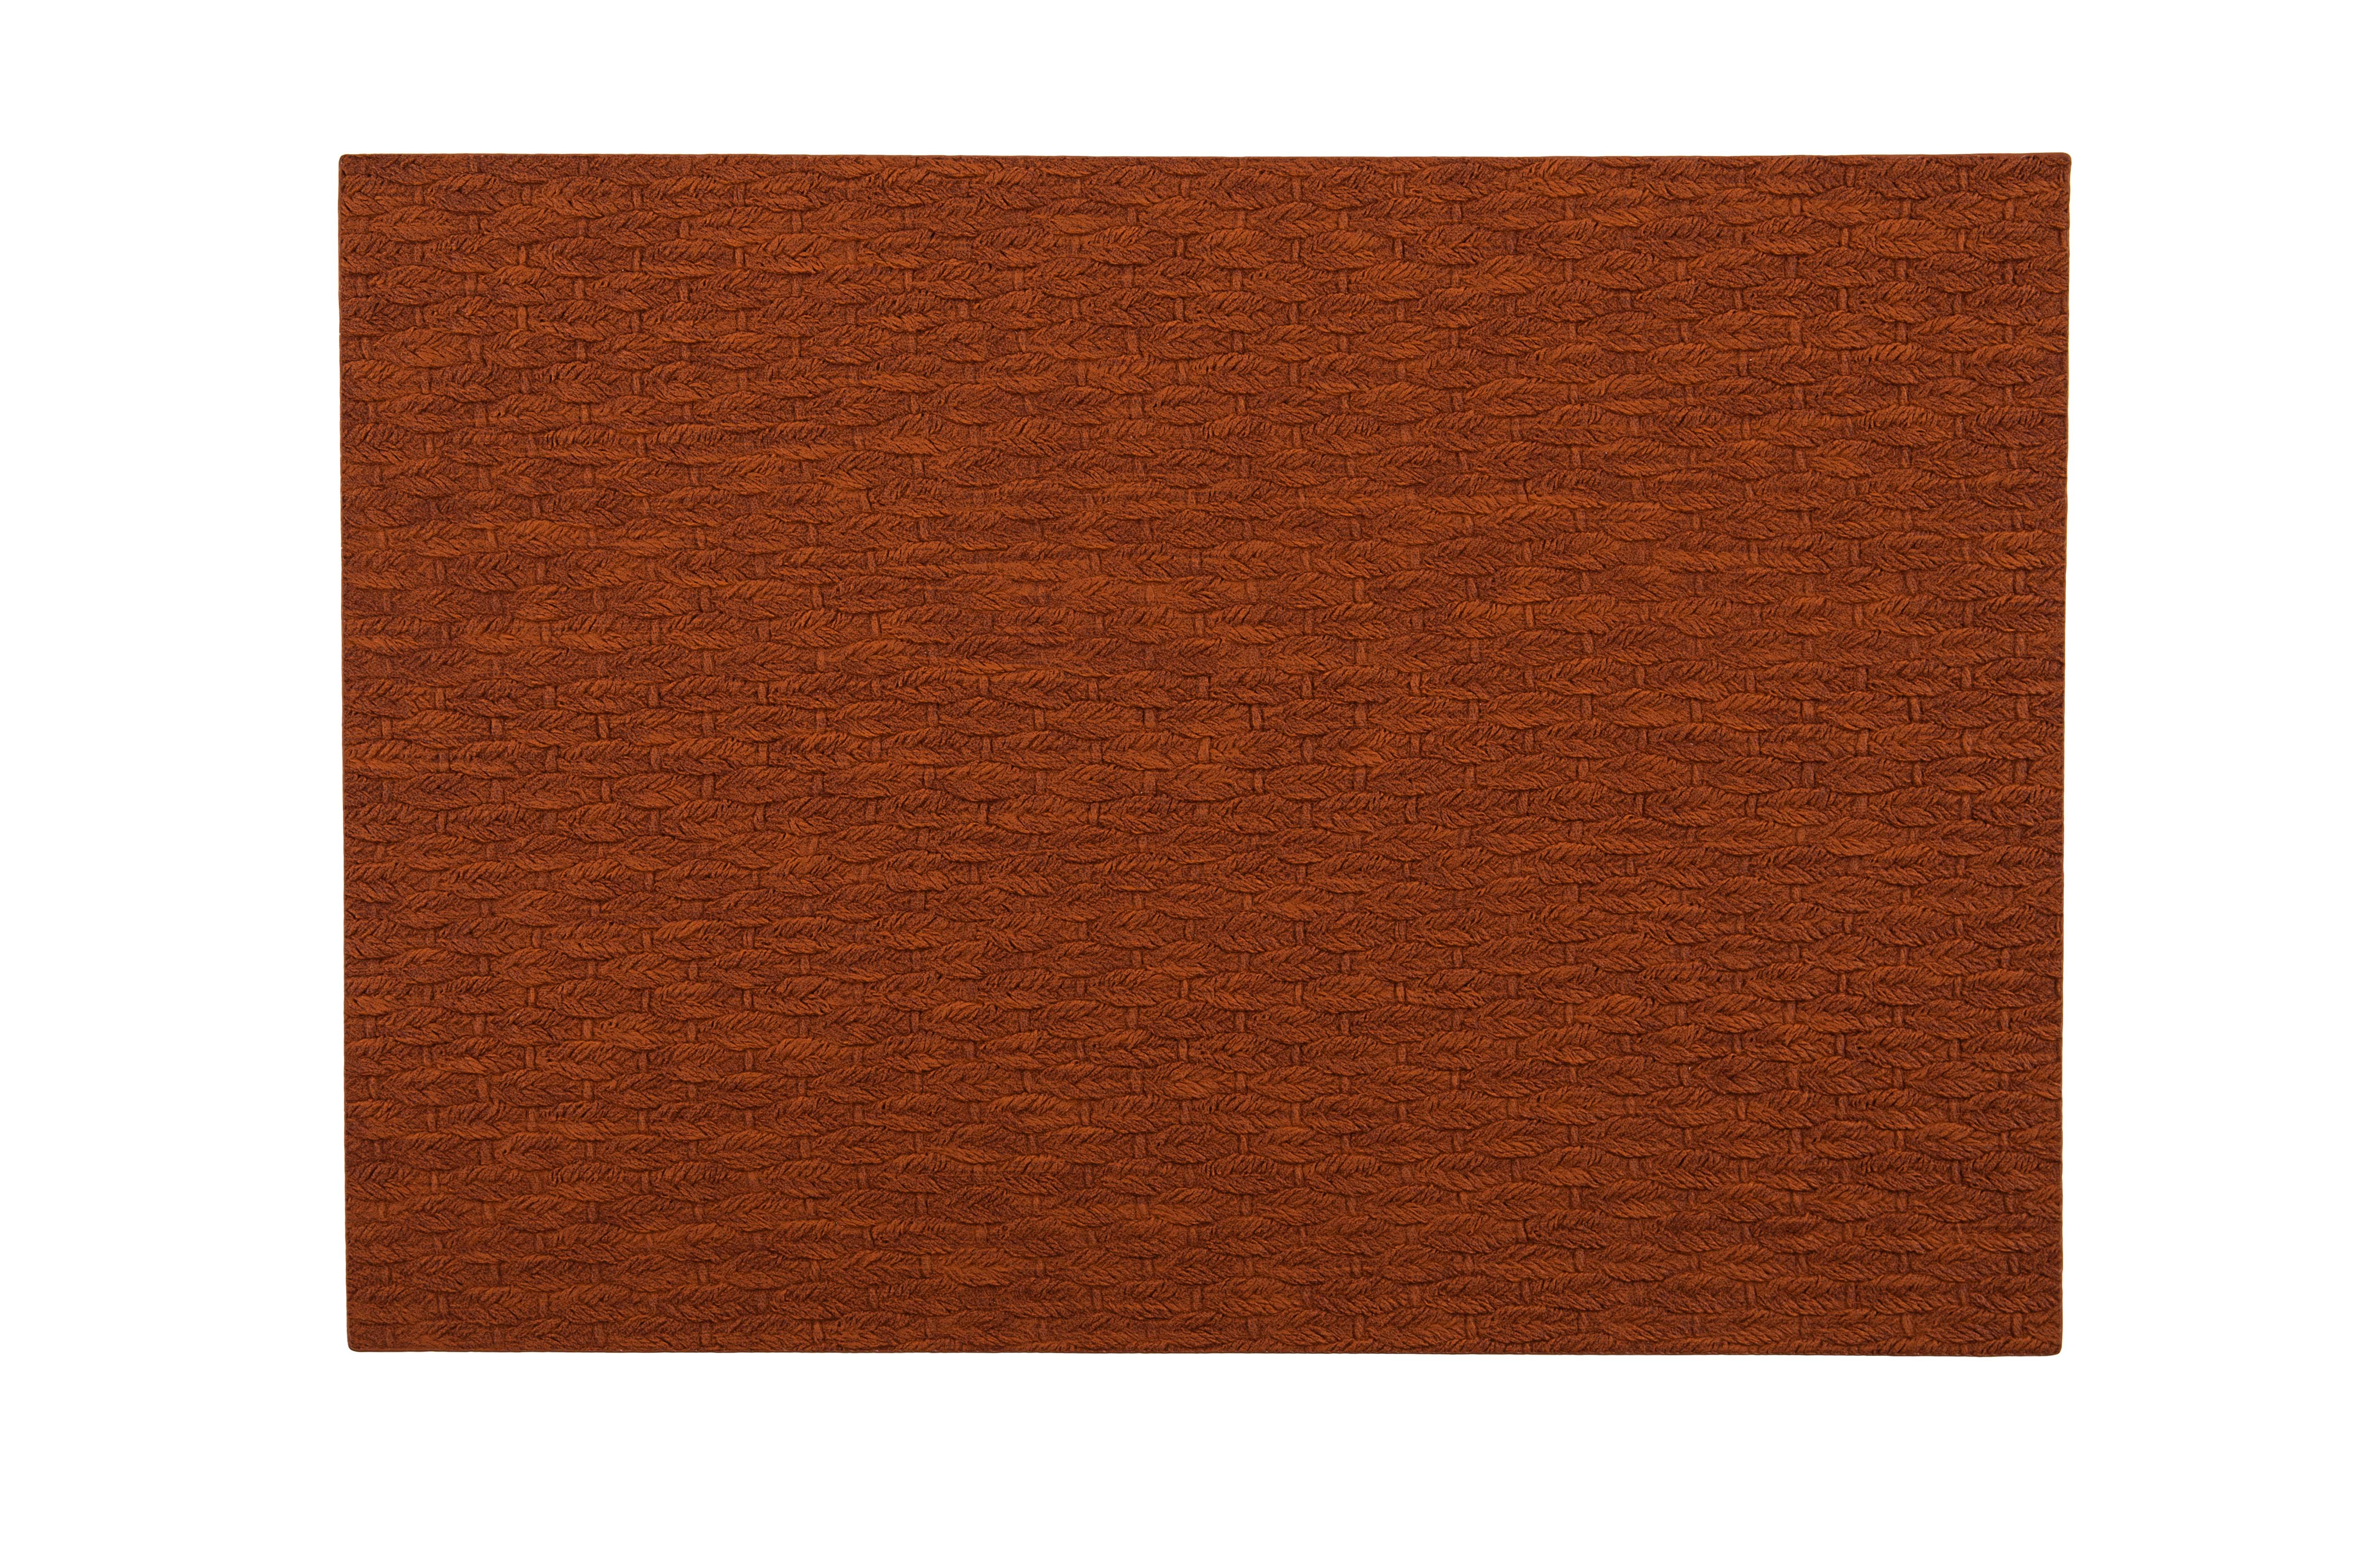 Placemat ARBIN - Leather look imitation - 45x33cm, brown